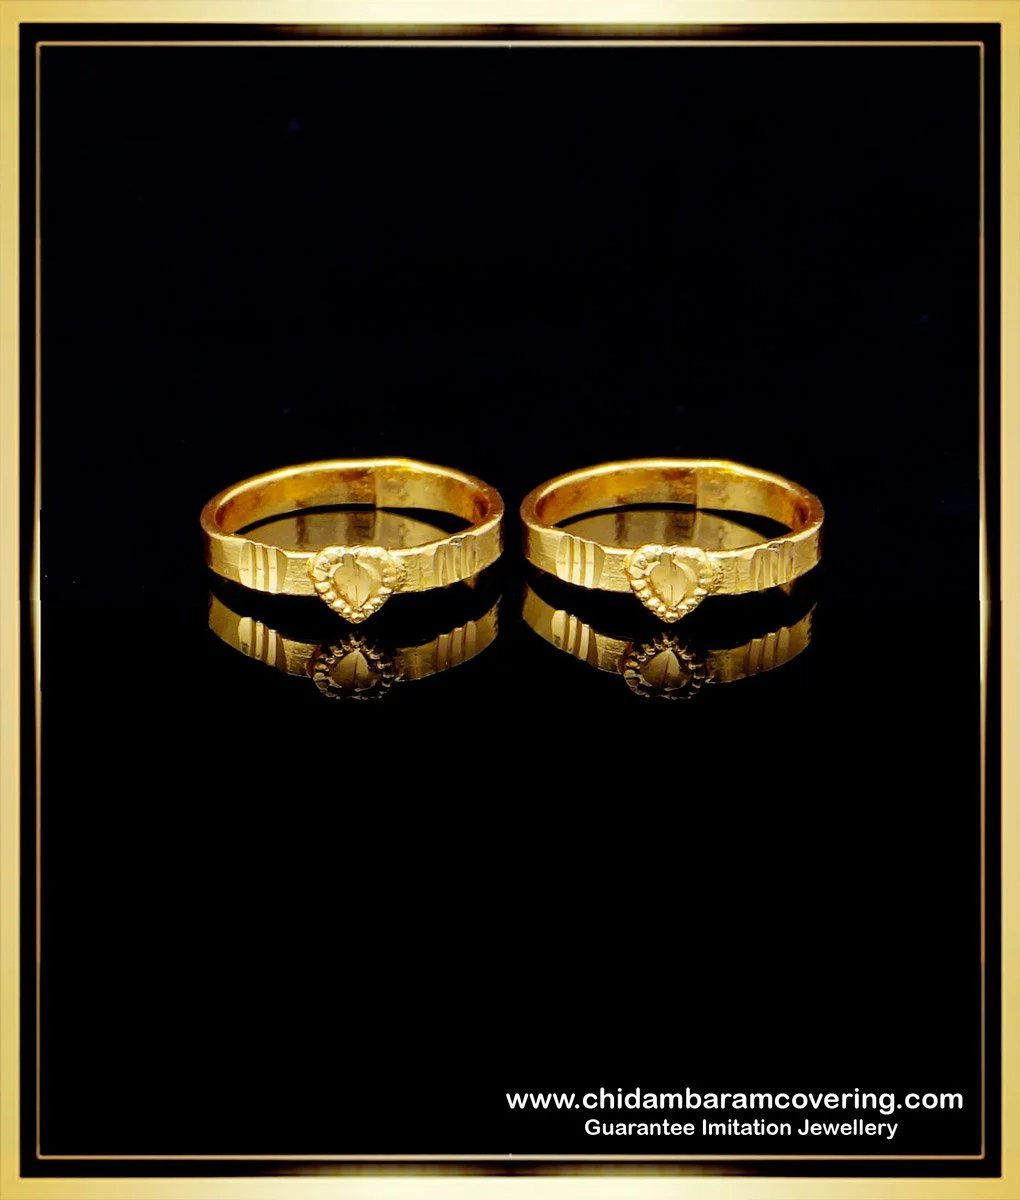 Shop Latest Range Of Clara Rings Online At Best Offers